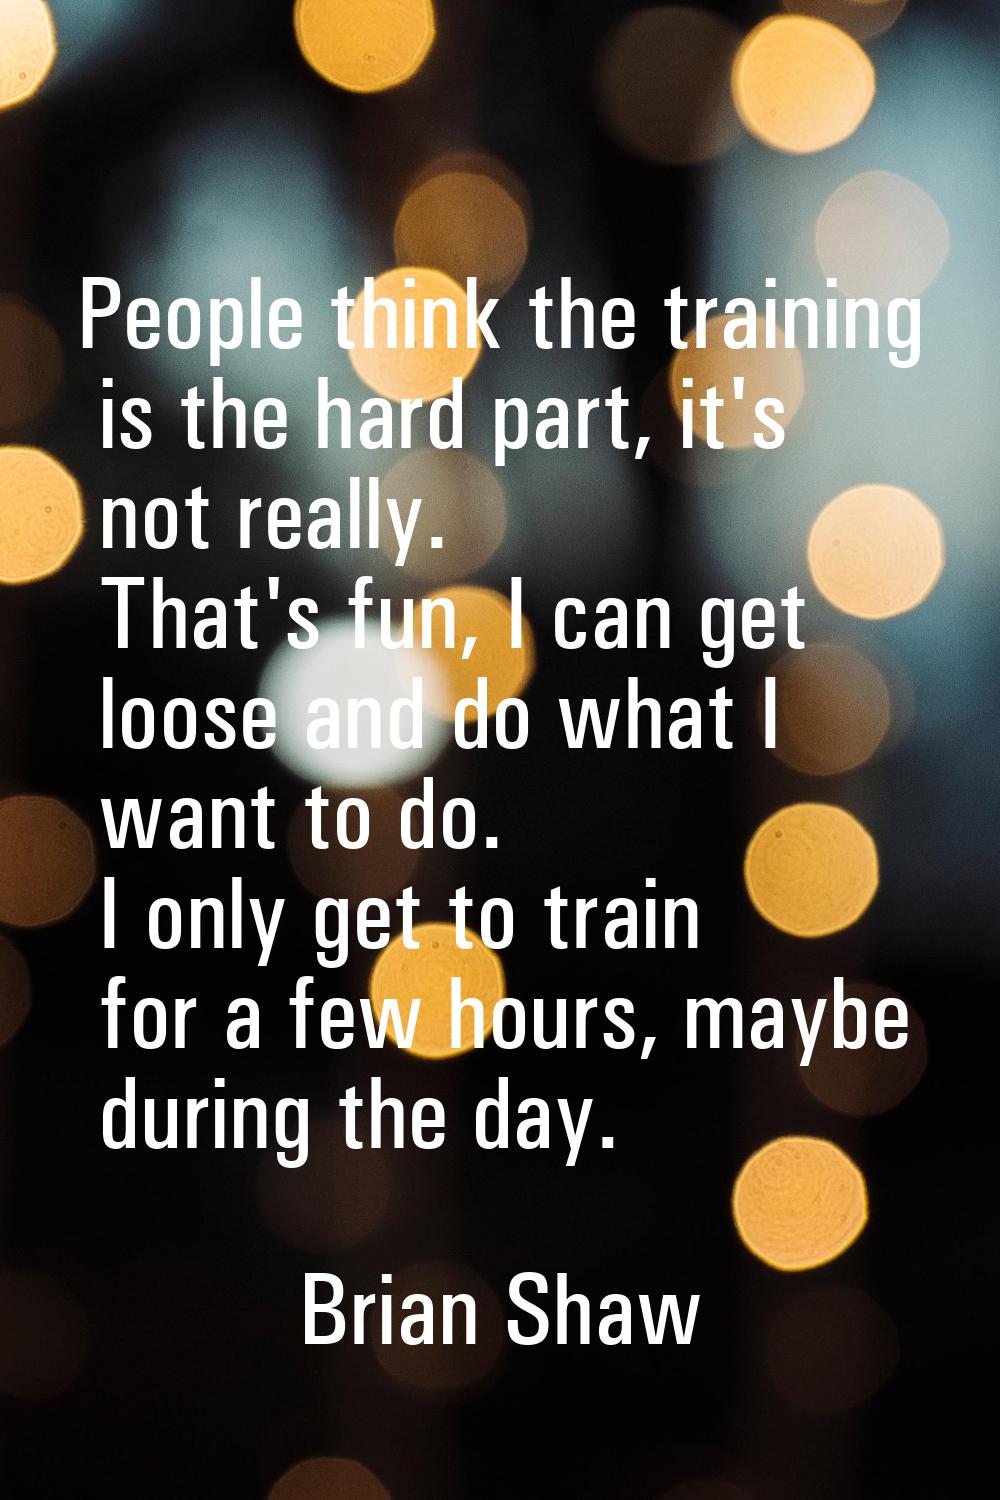 People think the training is the hard part, it's not really. That's fun, I can get loose and do wha